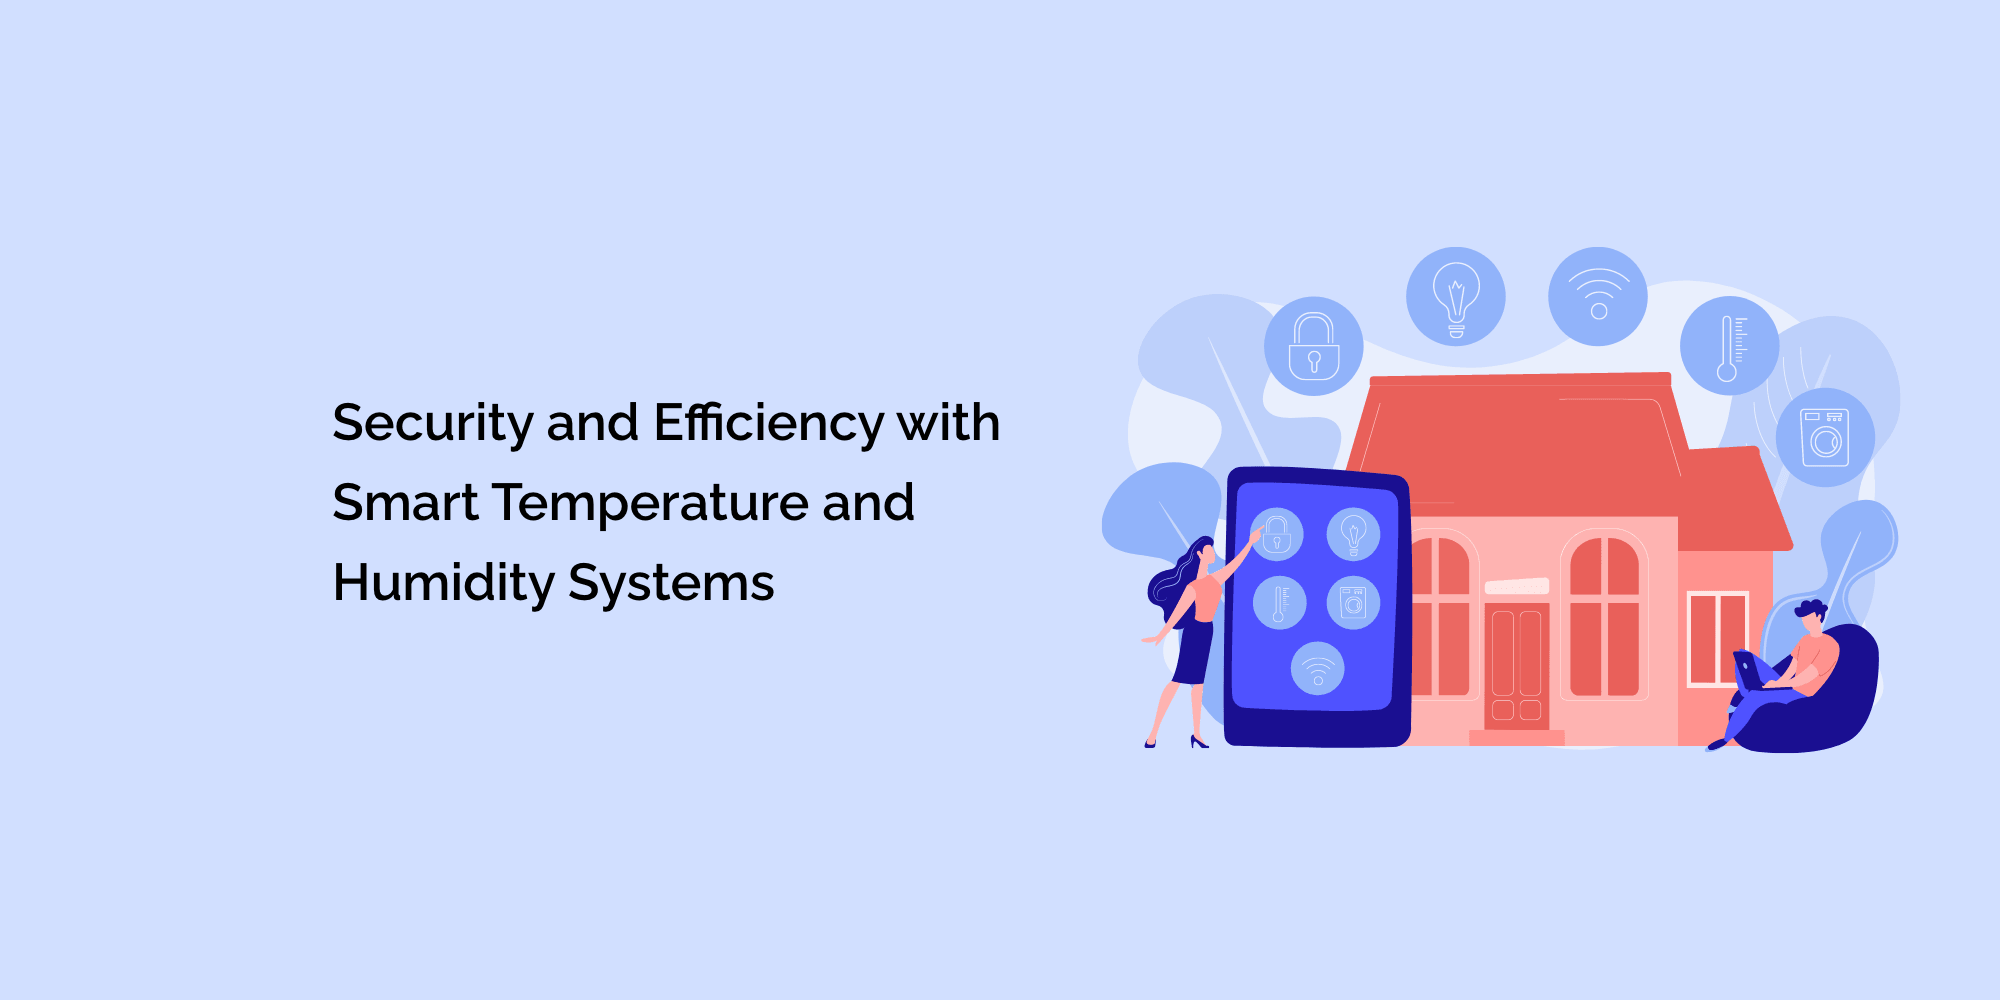 Security and Efficiency with Smart Temperature and Humidity Systems